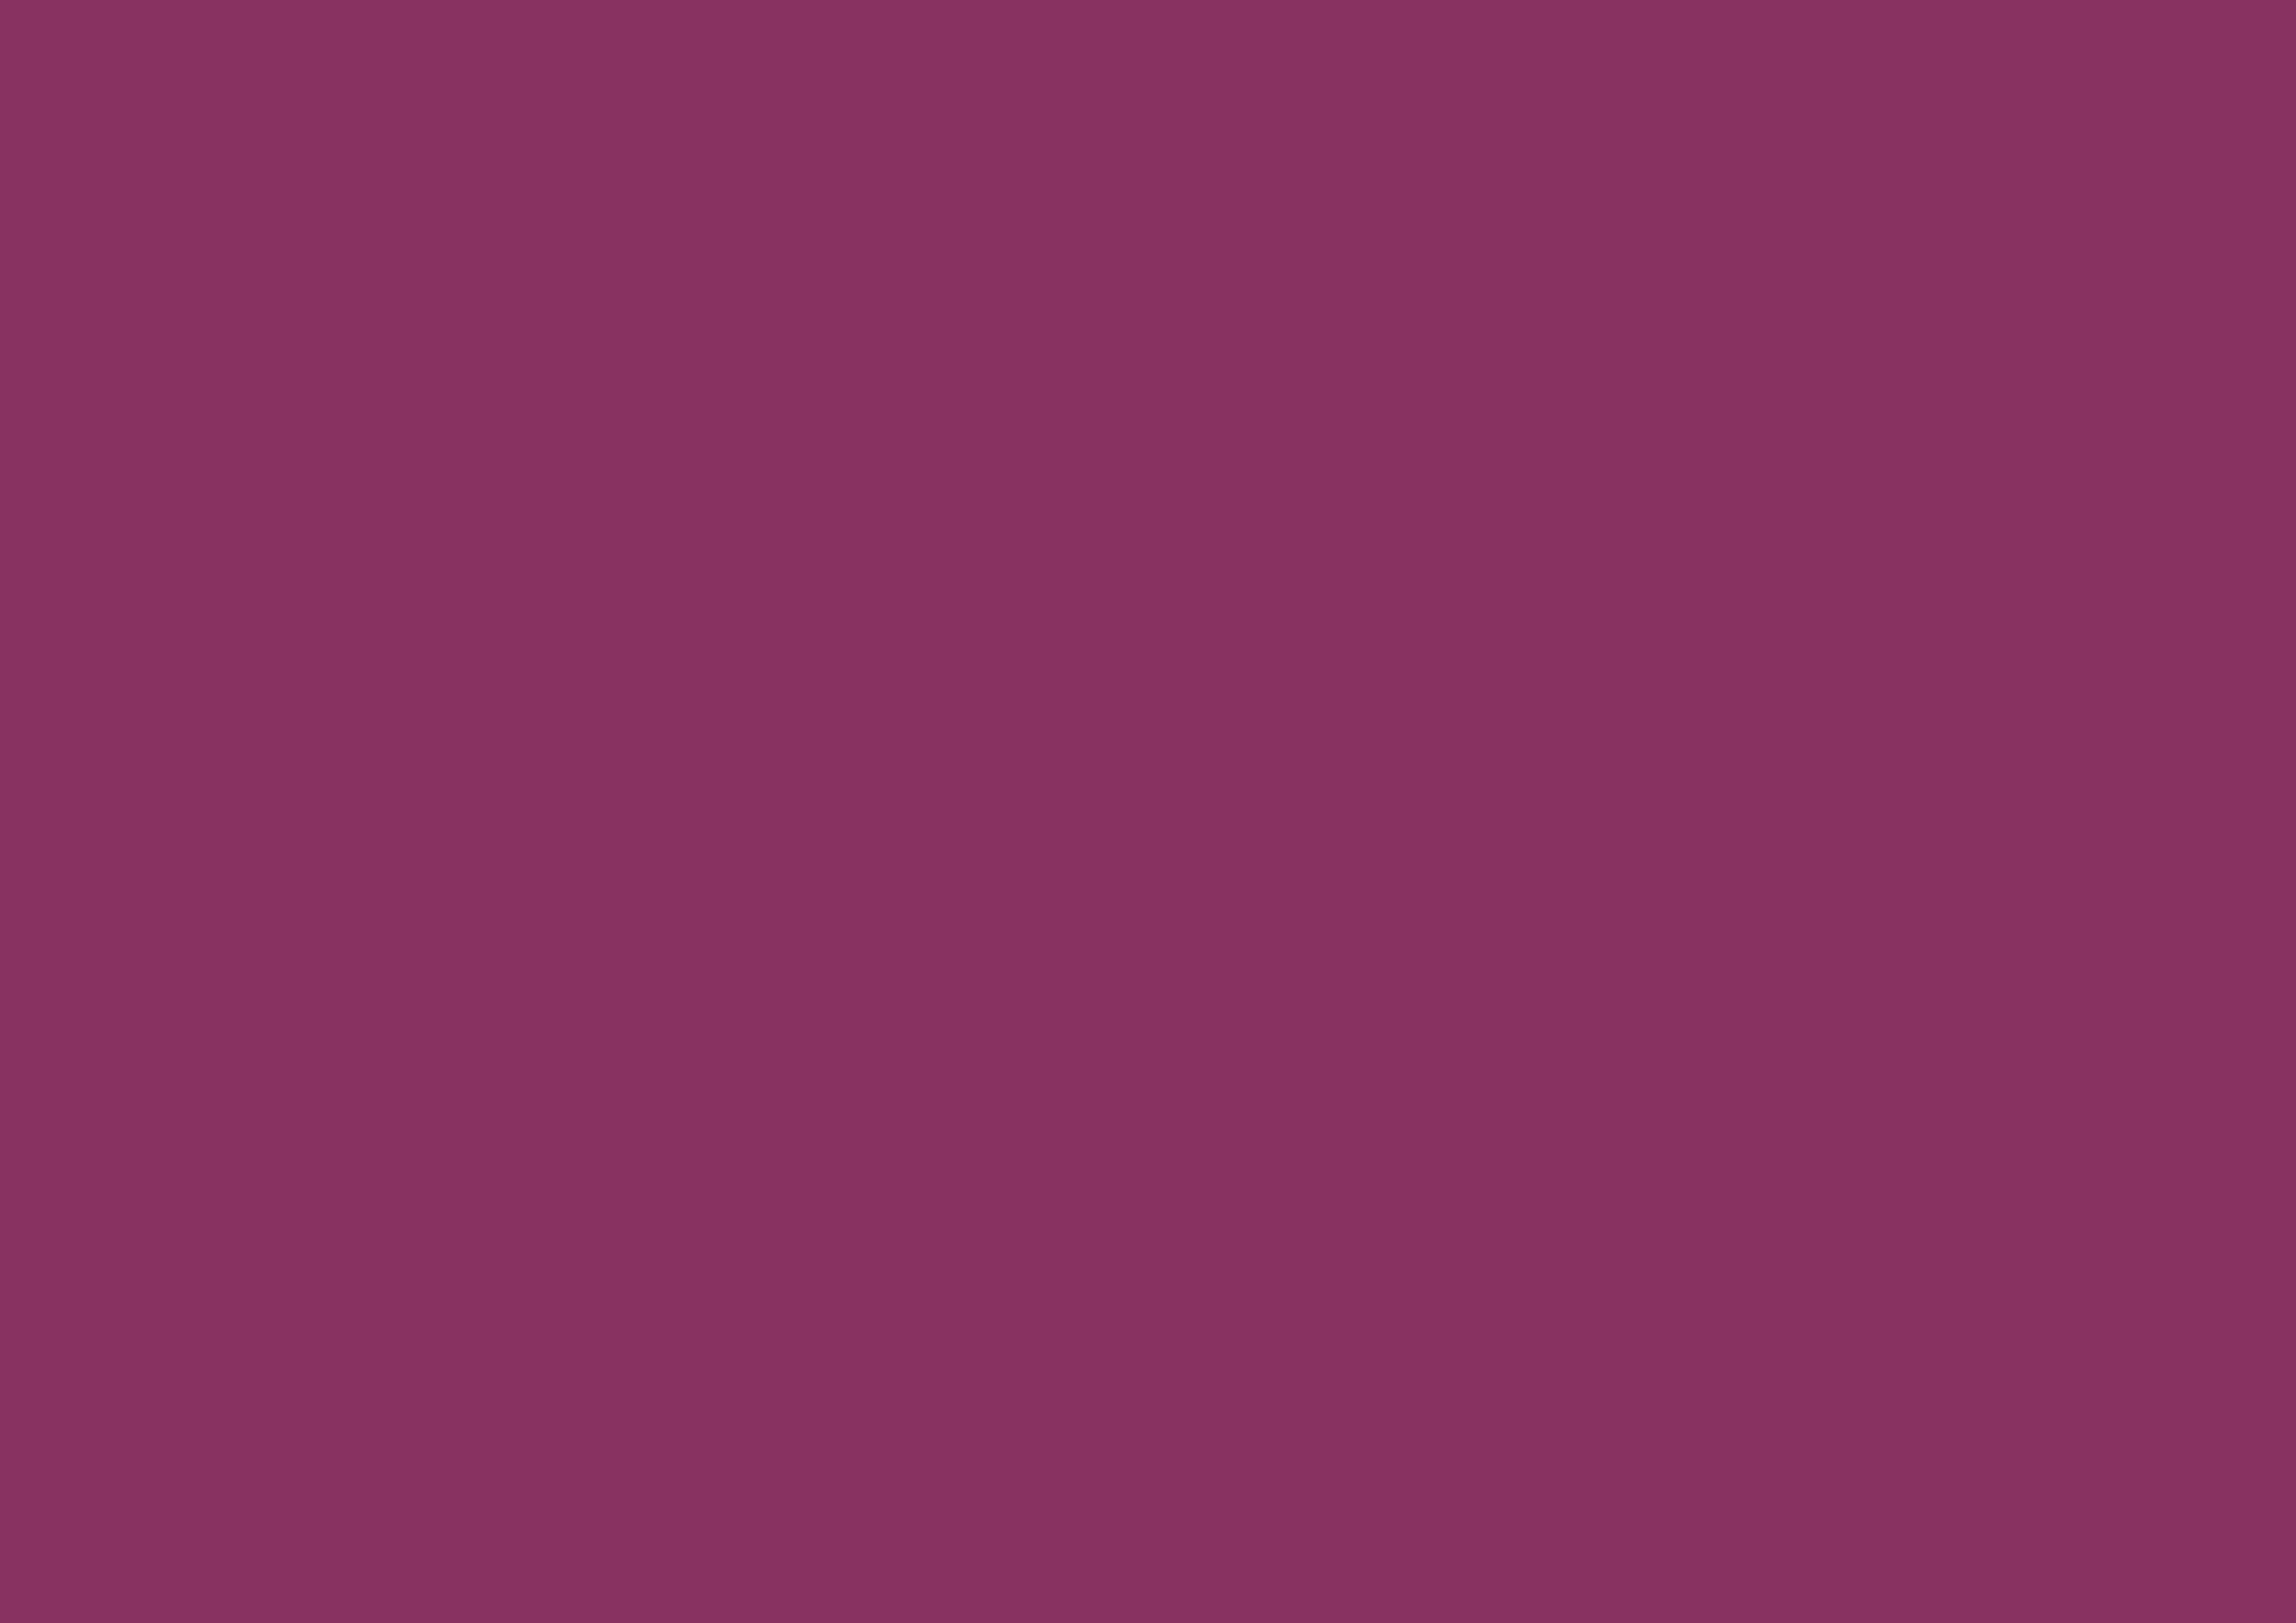 3508x2480 Boysenberry Solid Color Background